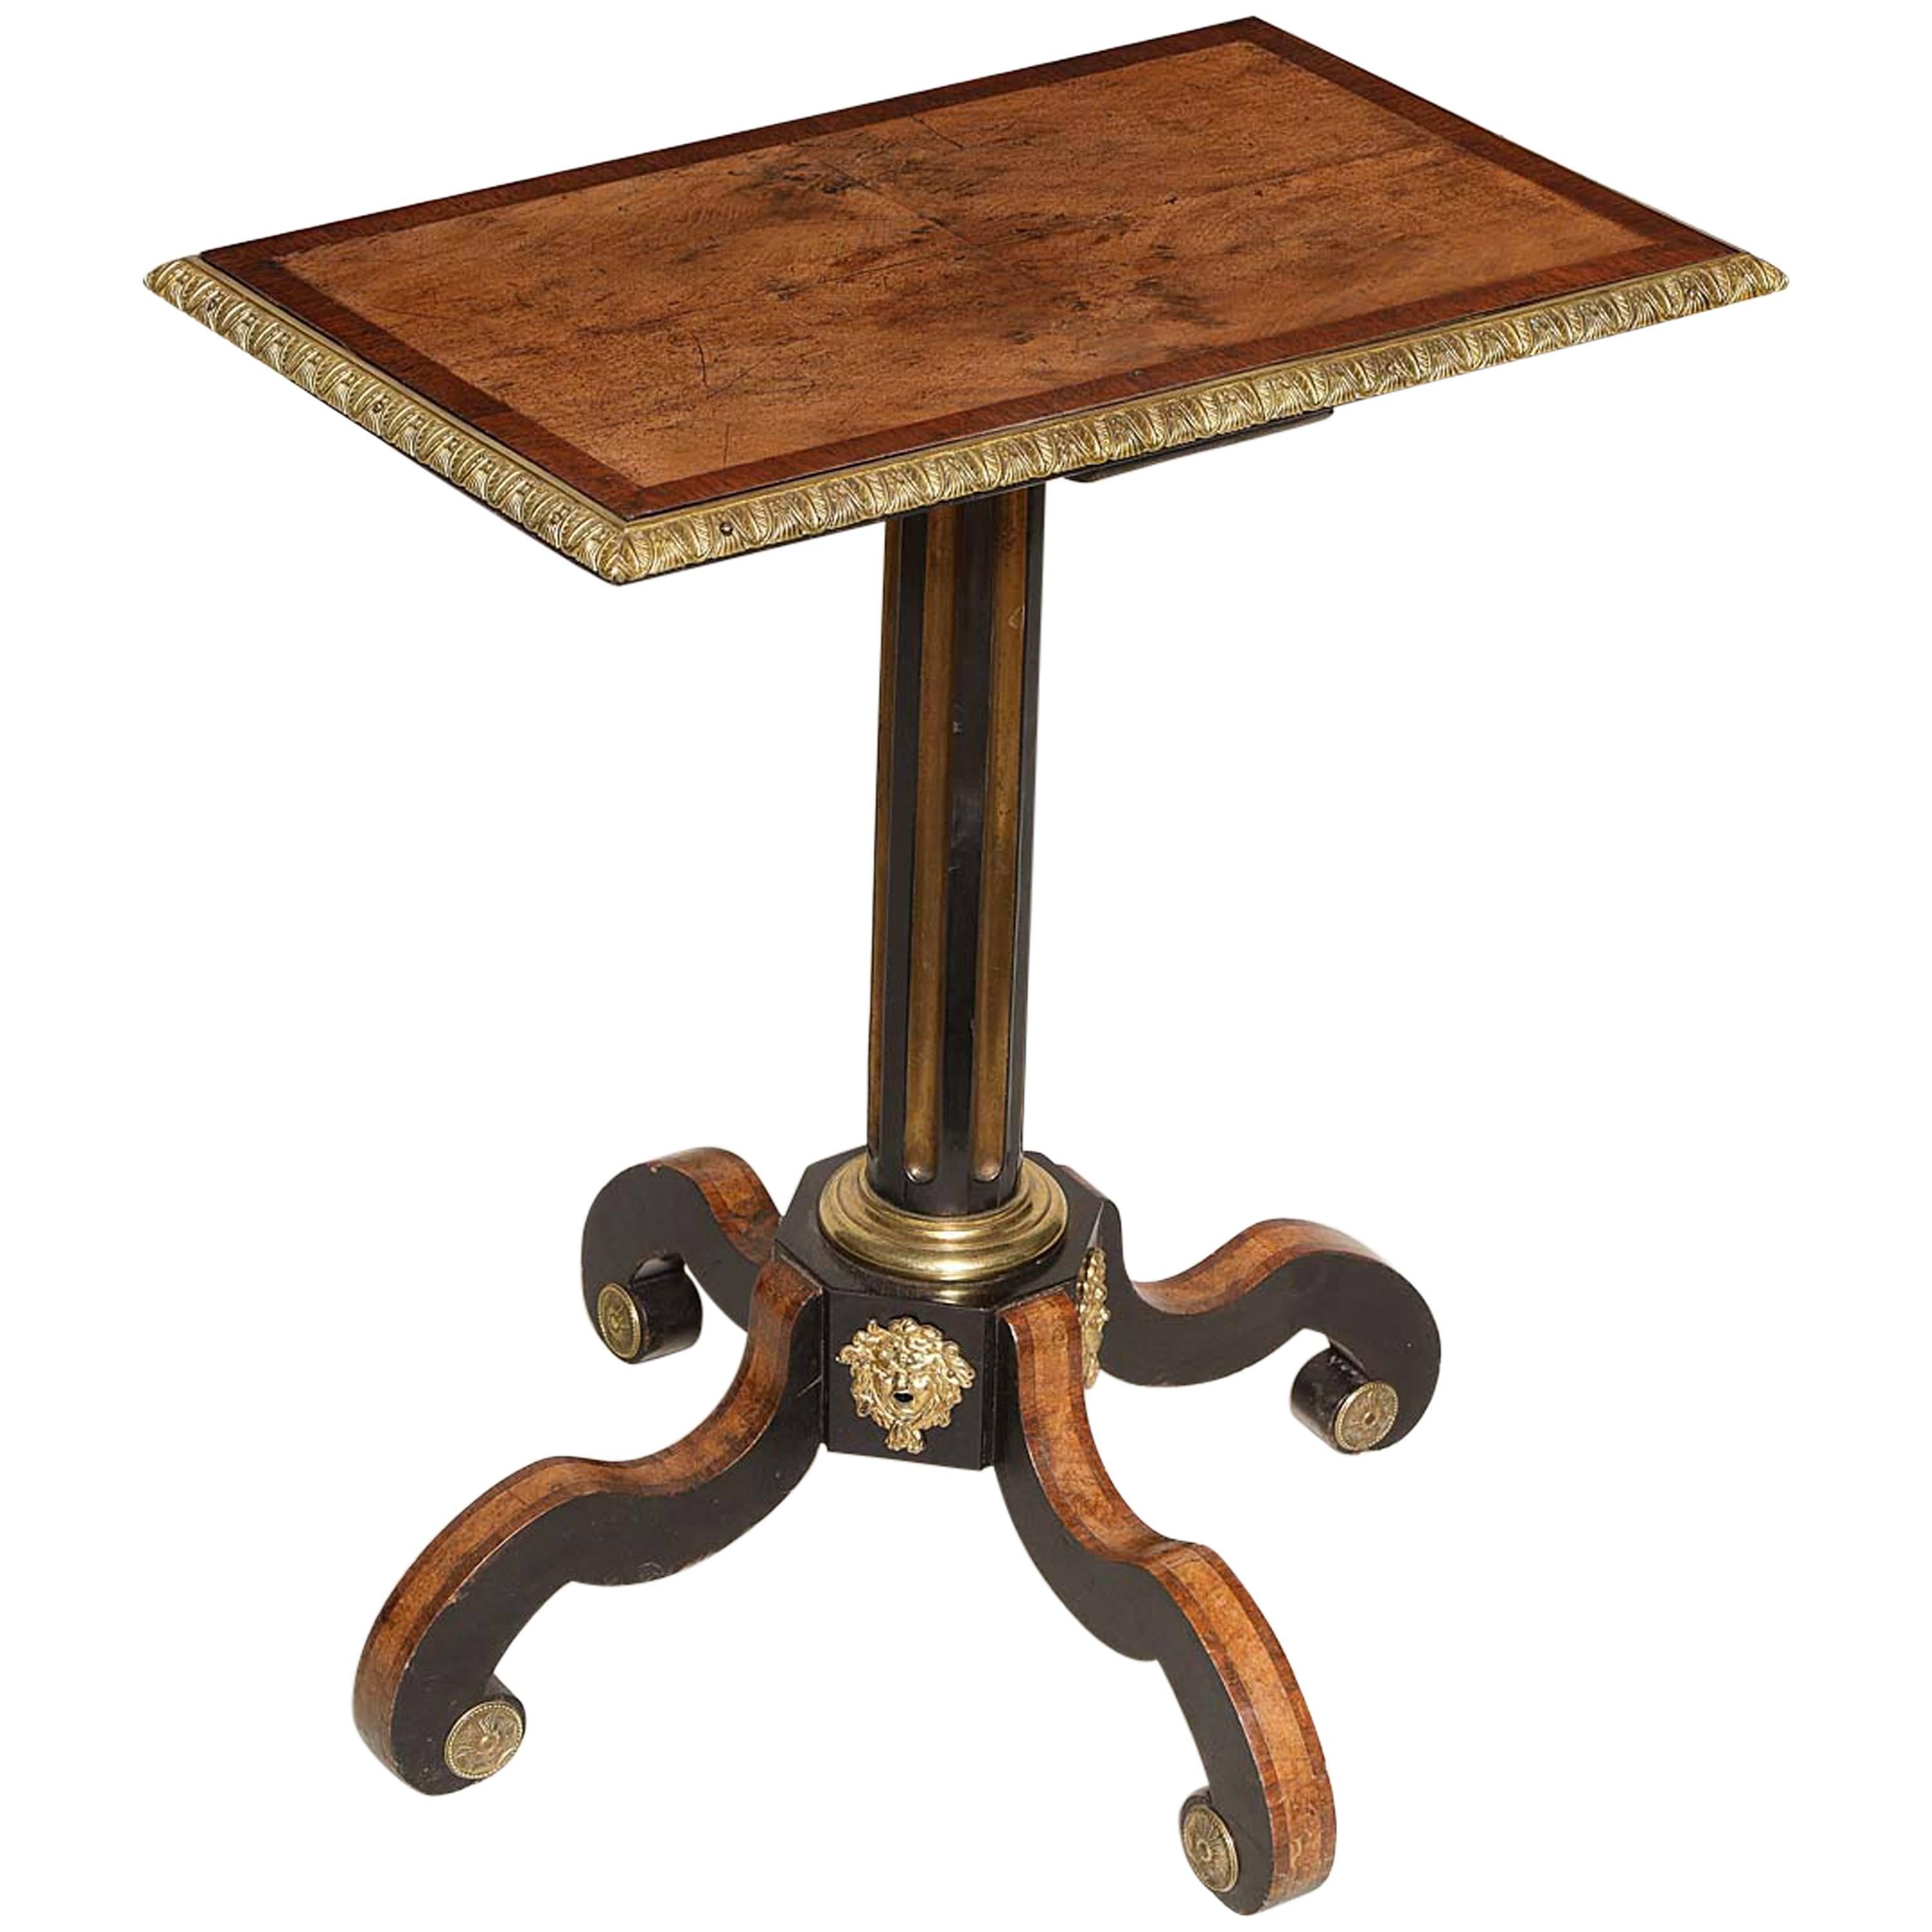 English Regency Table in the Manner of Thomas Parker